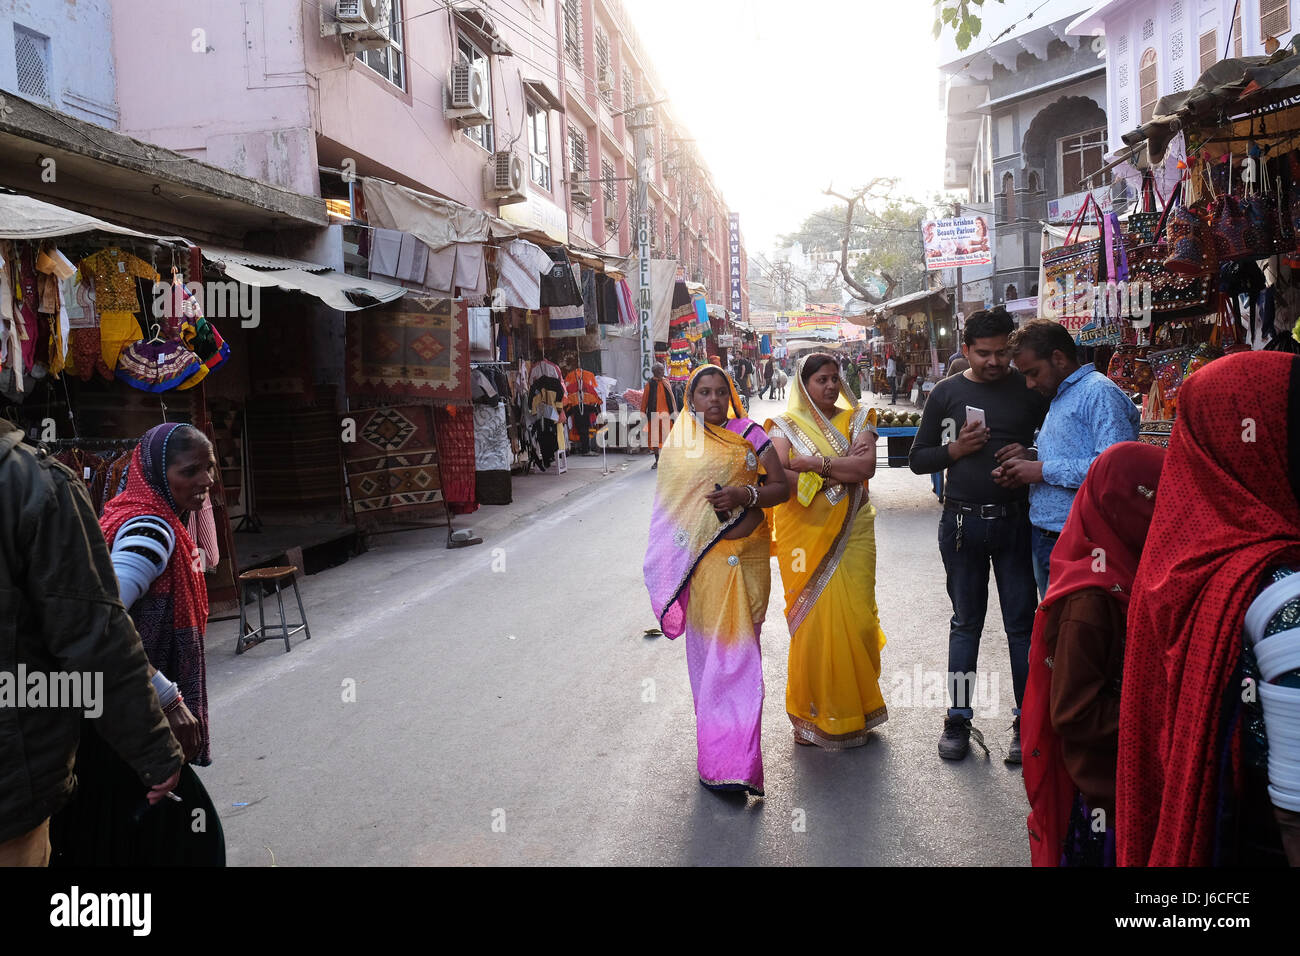 Indian women with traditional colored sari on the street of Pushkar, Rajasthan, India Stock Photo